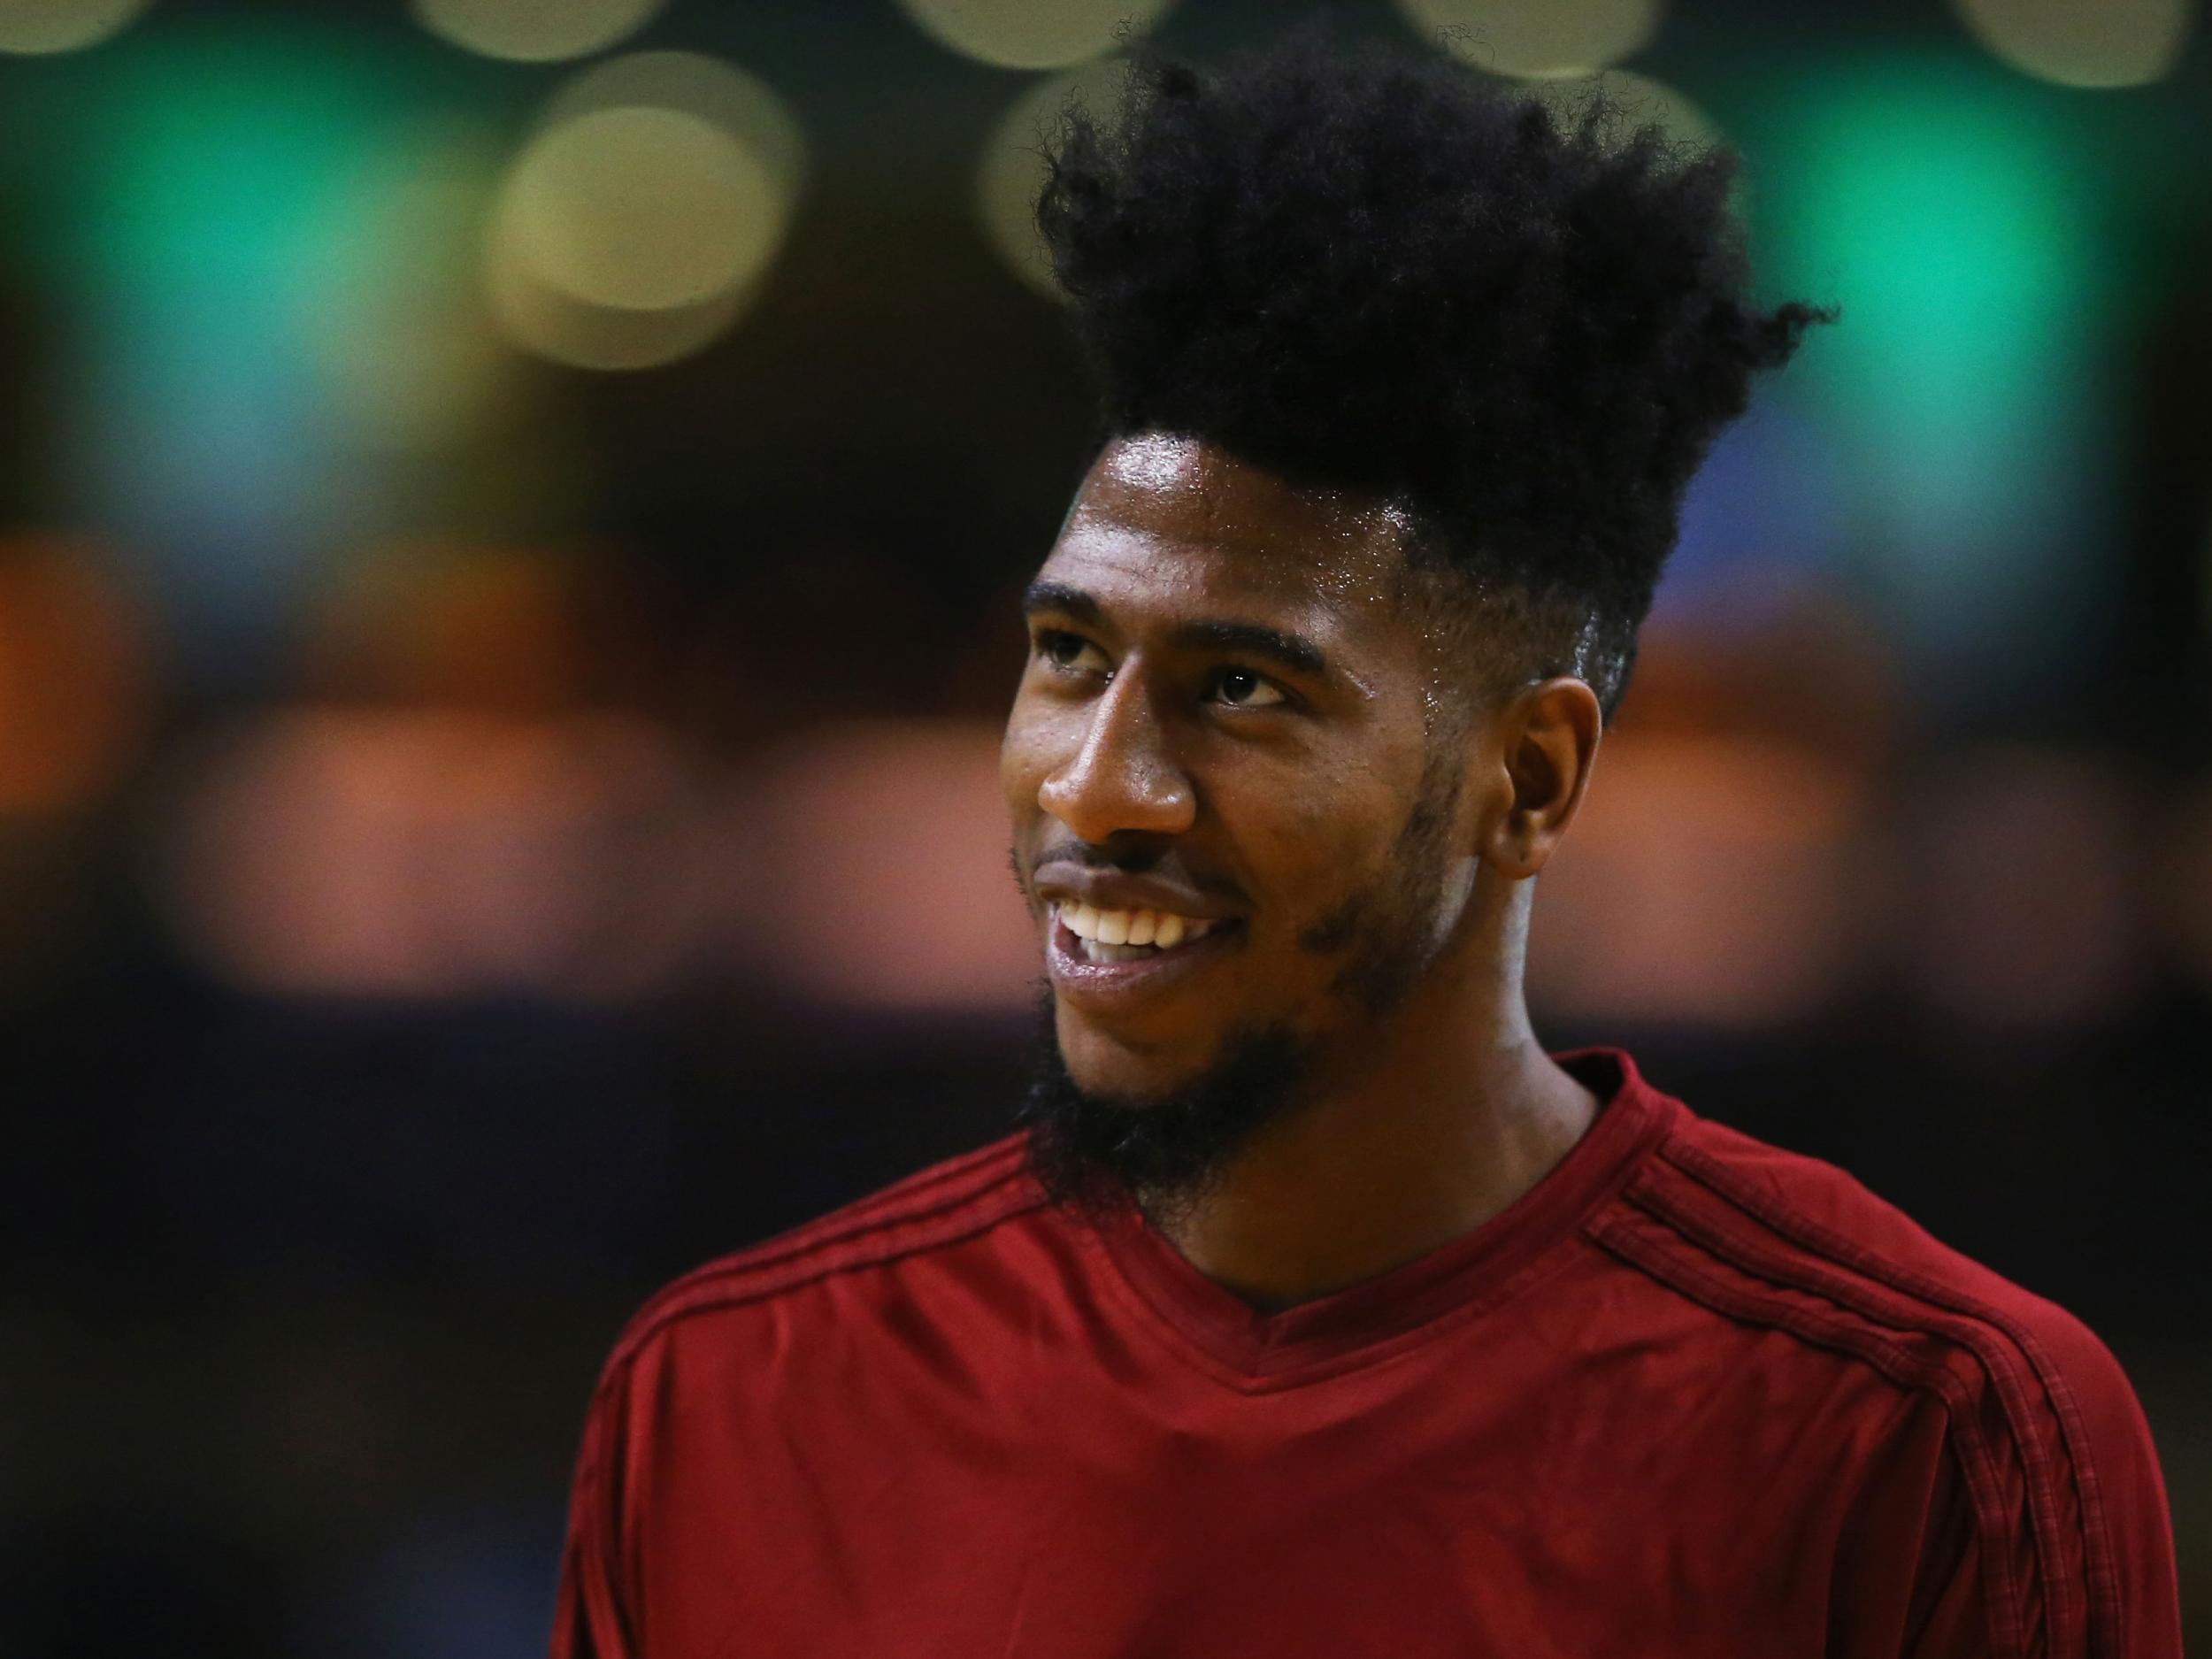 Cleveland Cavaliers guard Iman Shumpert helps deliver his wife's baby